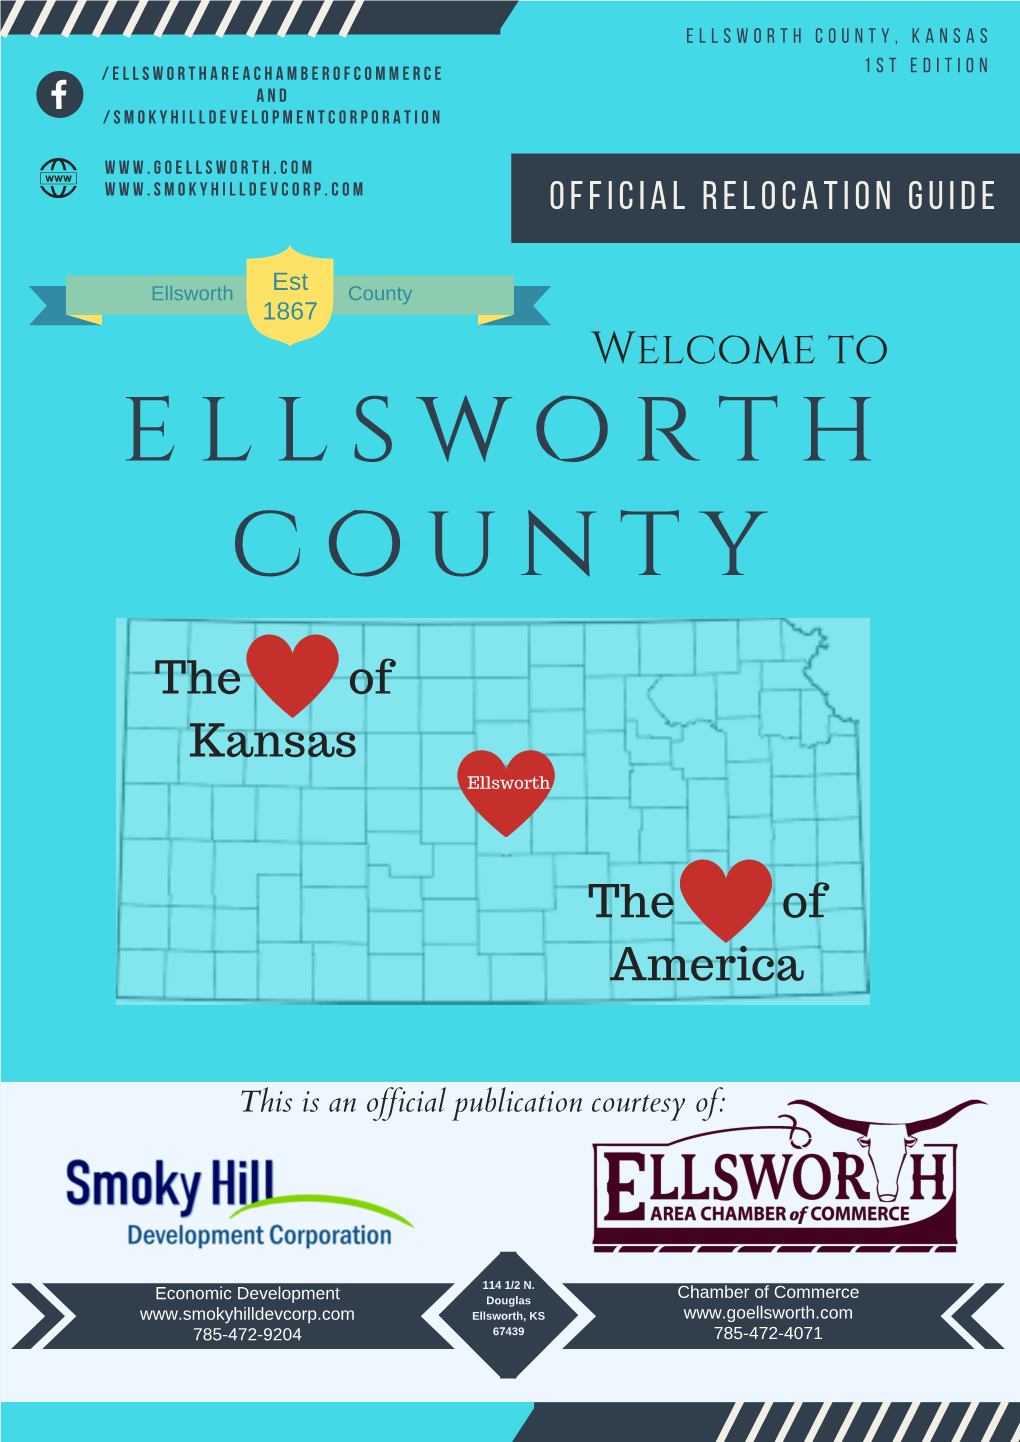 Ellsworth County Relocation Guide